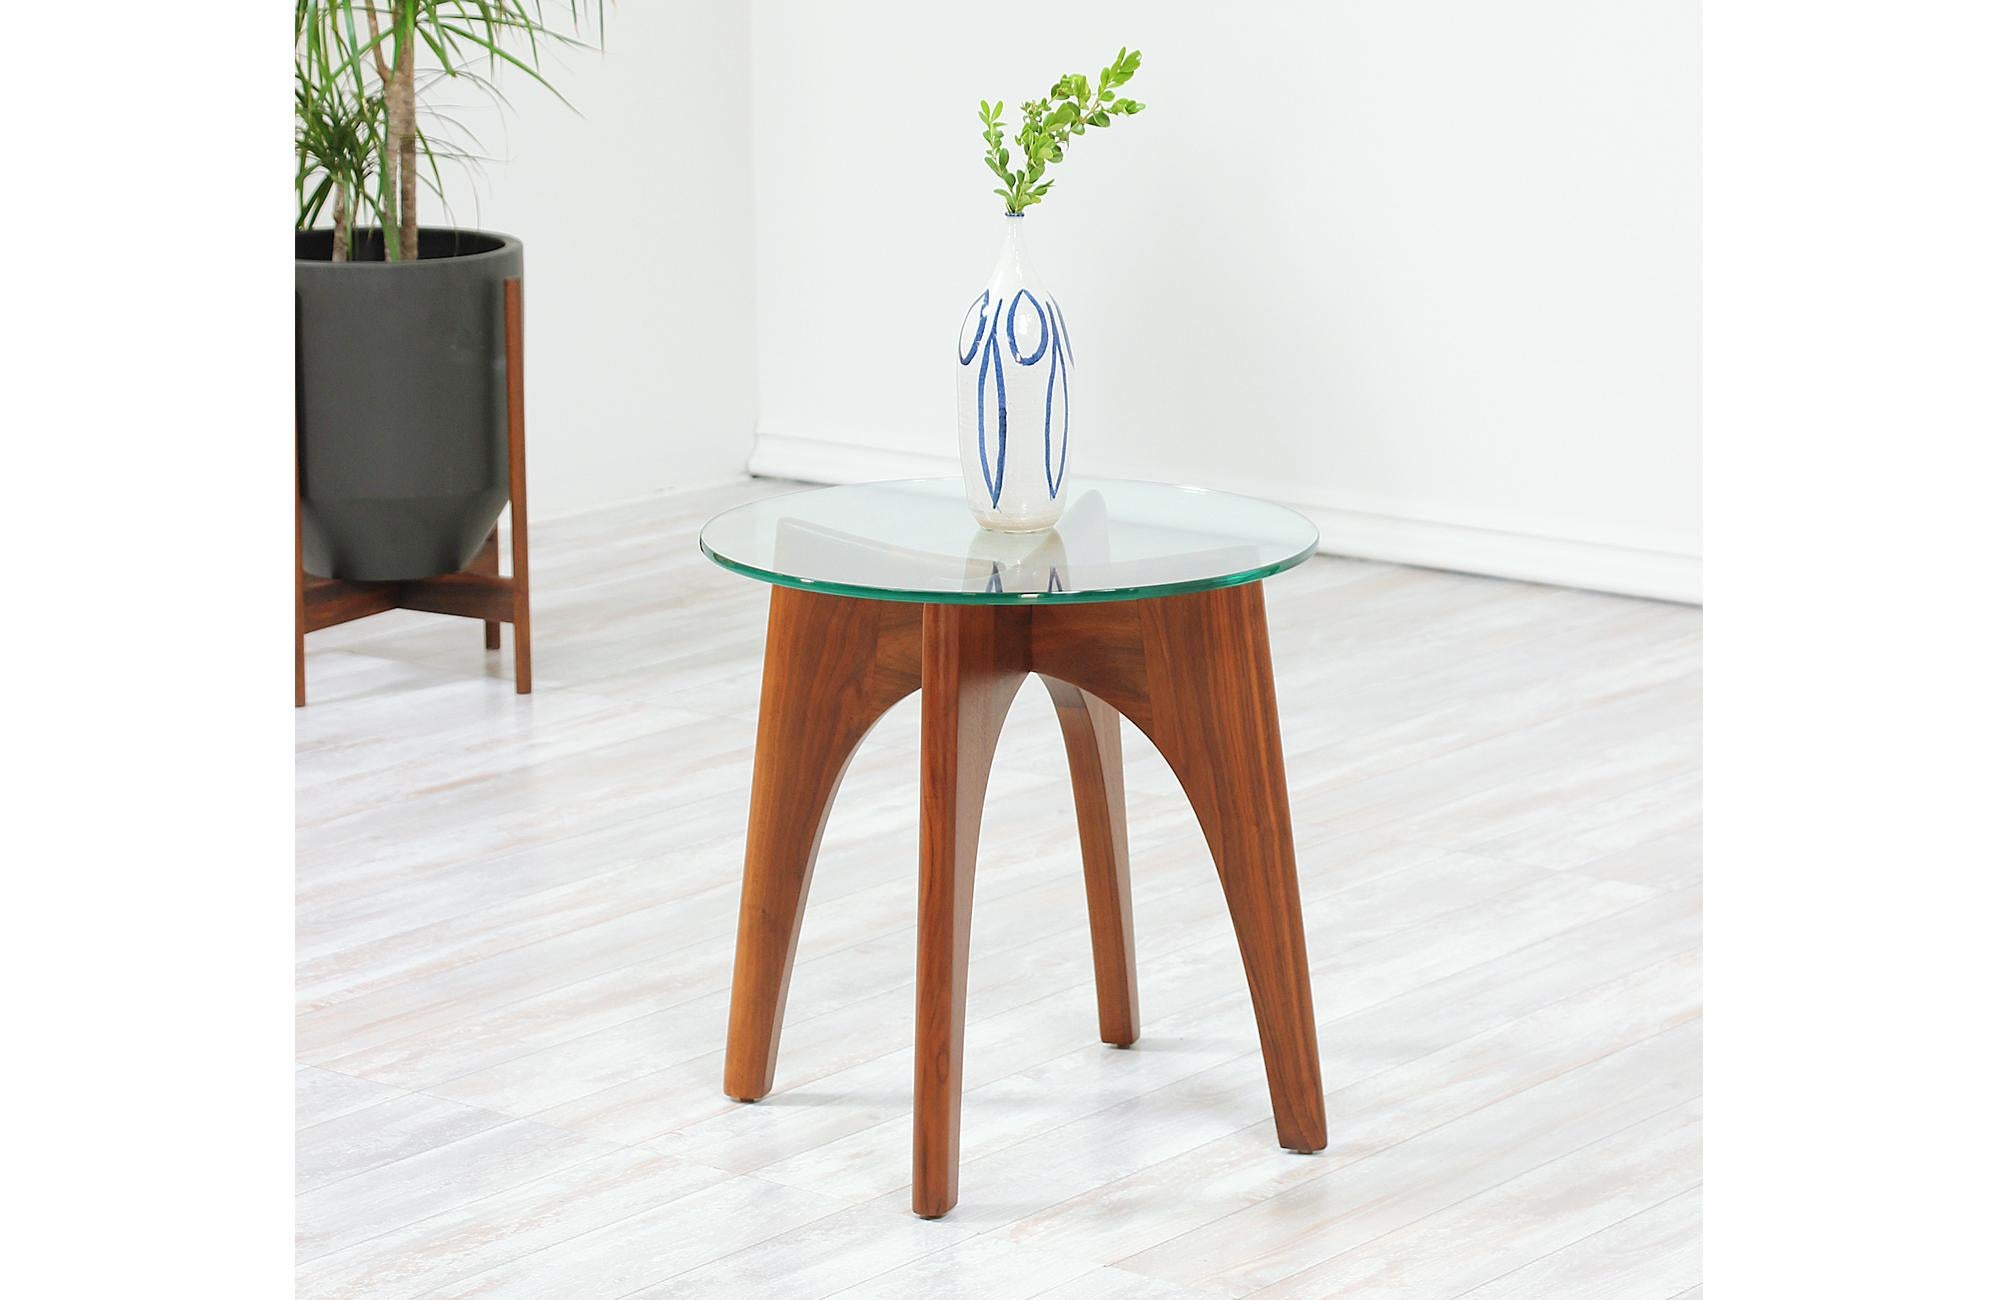 Mid-20th Century Adrian Pearsall Sculpted Walnut Side Tables for Craft Associates